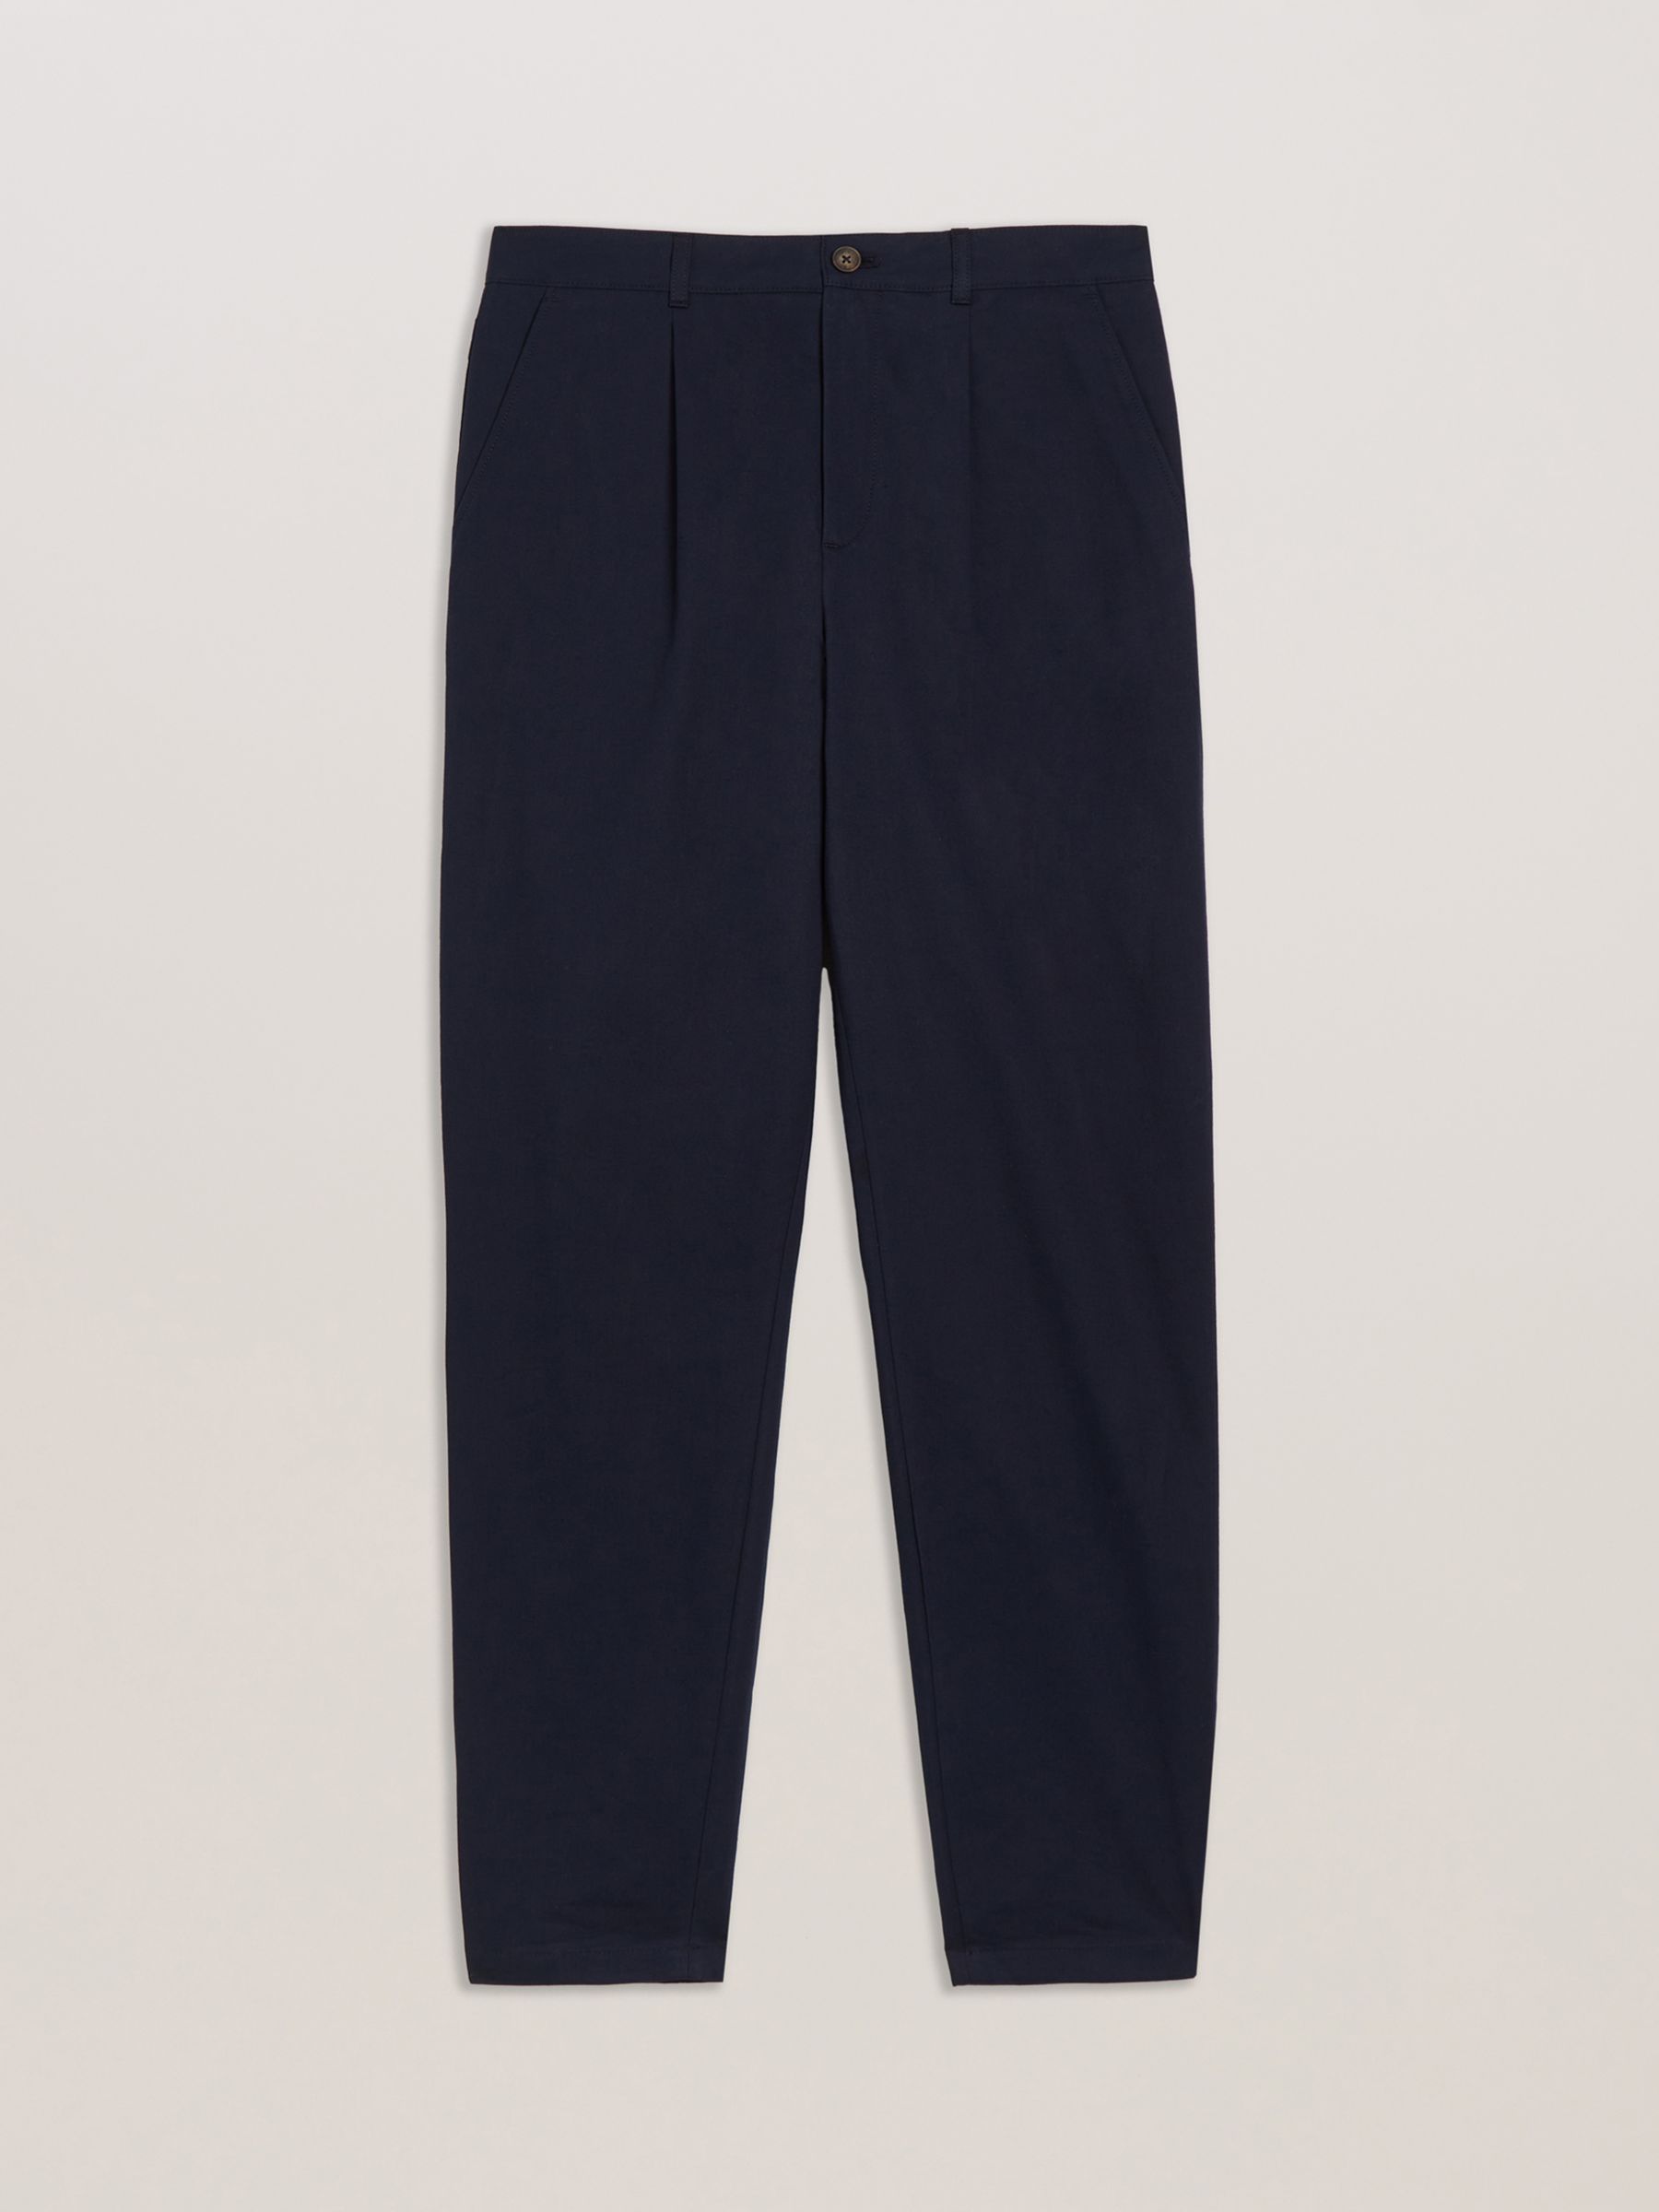 Ted Baker Holmer Linen Blend Chino Trousers, Navy, 36R